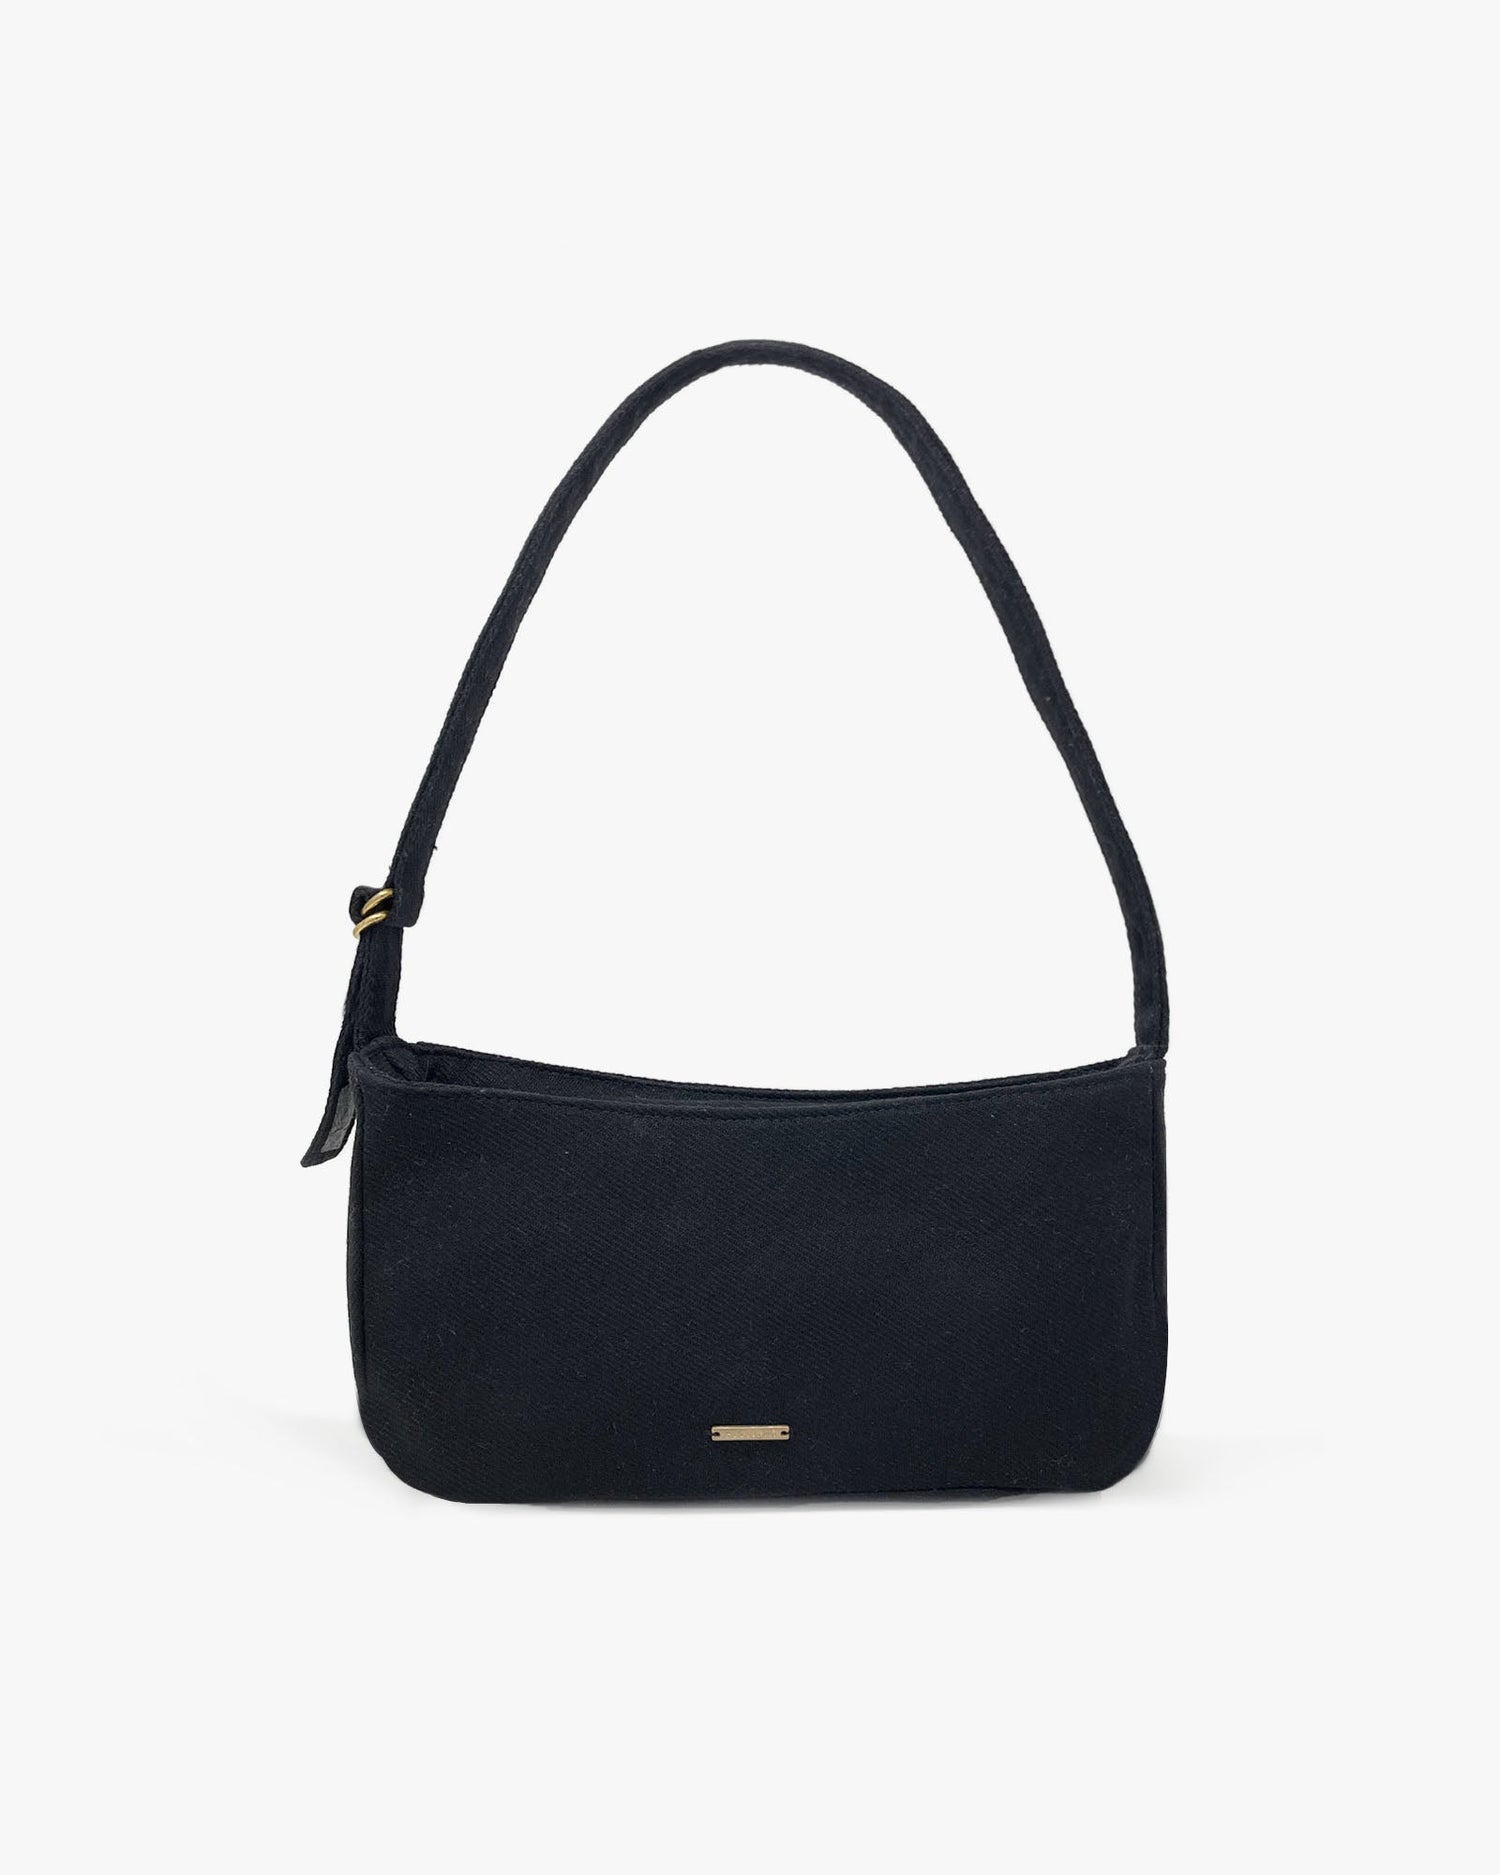 The Baguette Bag - Classic Night Black: Eco-Friendly and Sustainable Clearance by ecoright